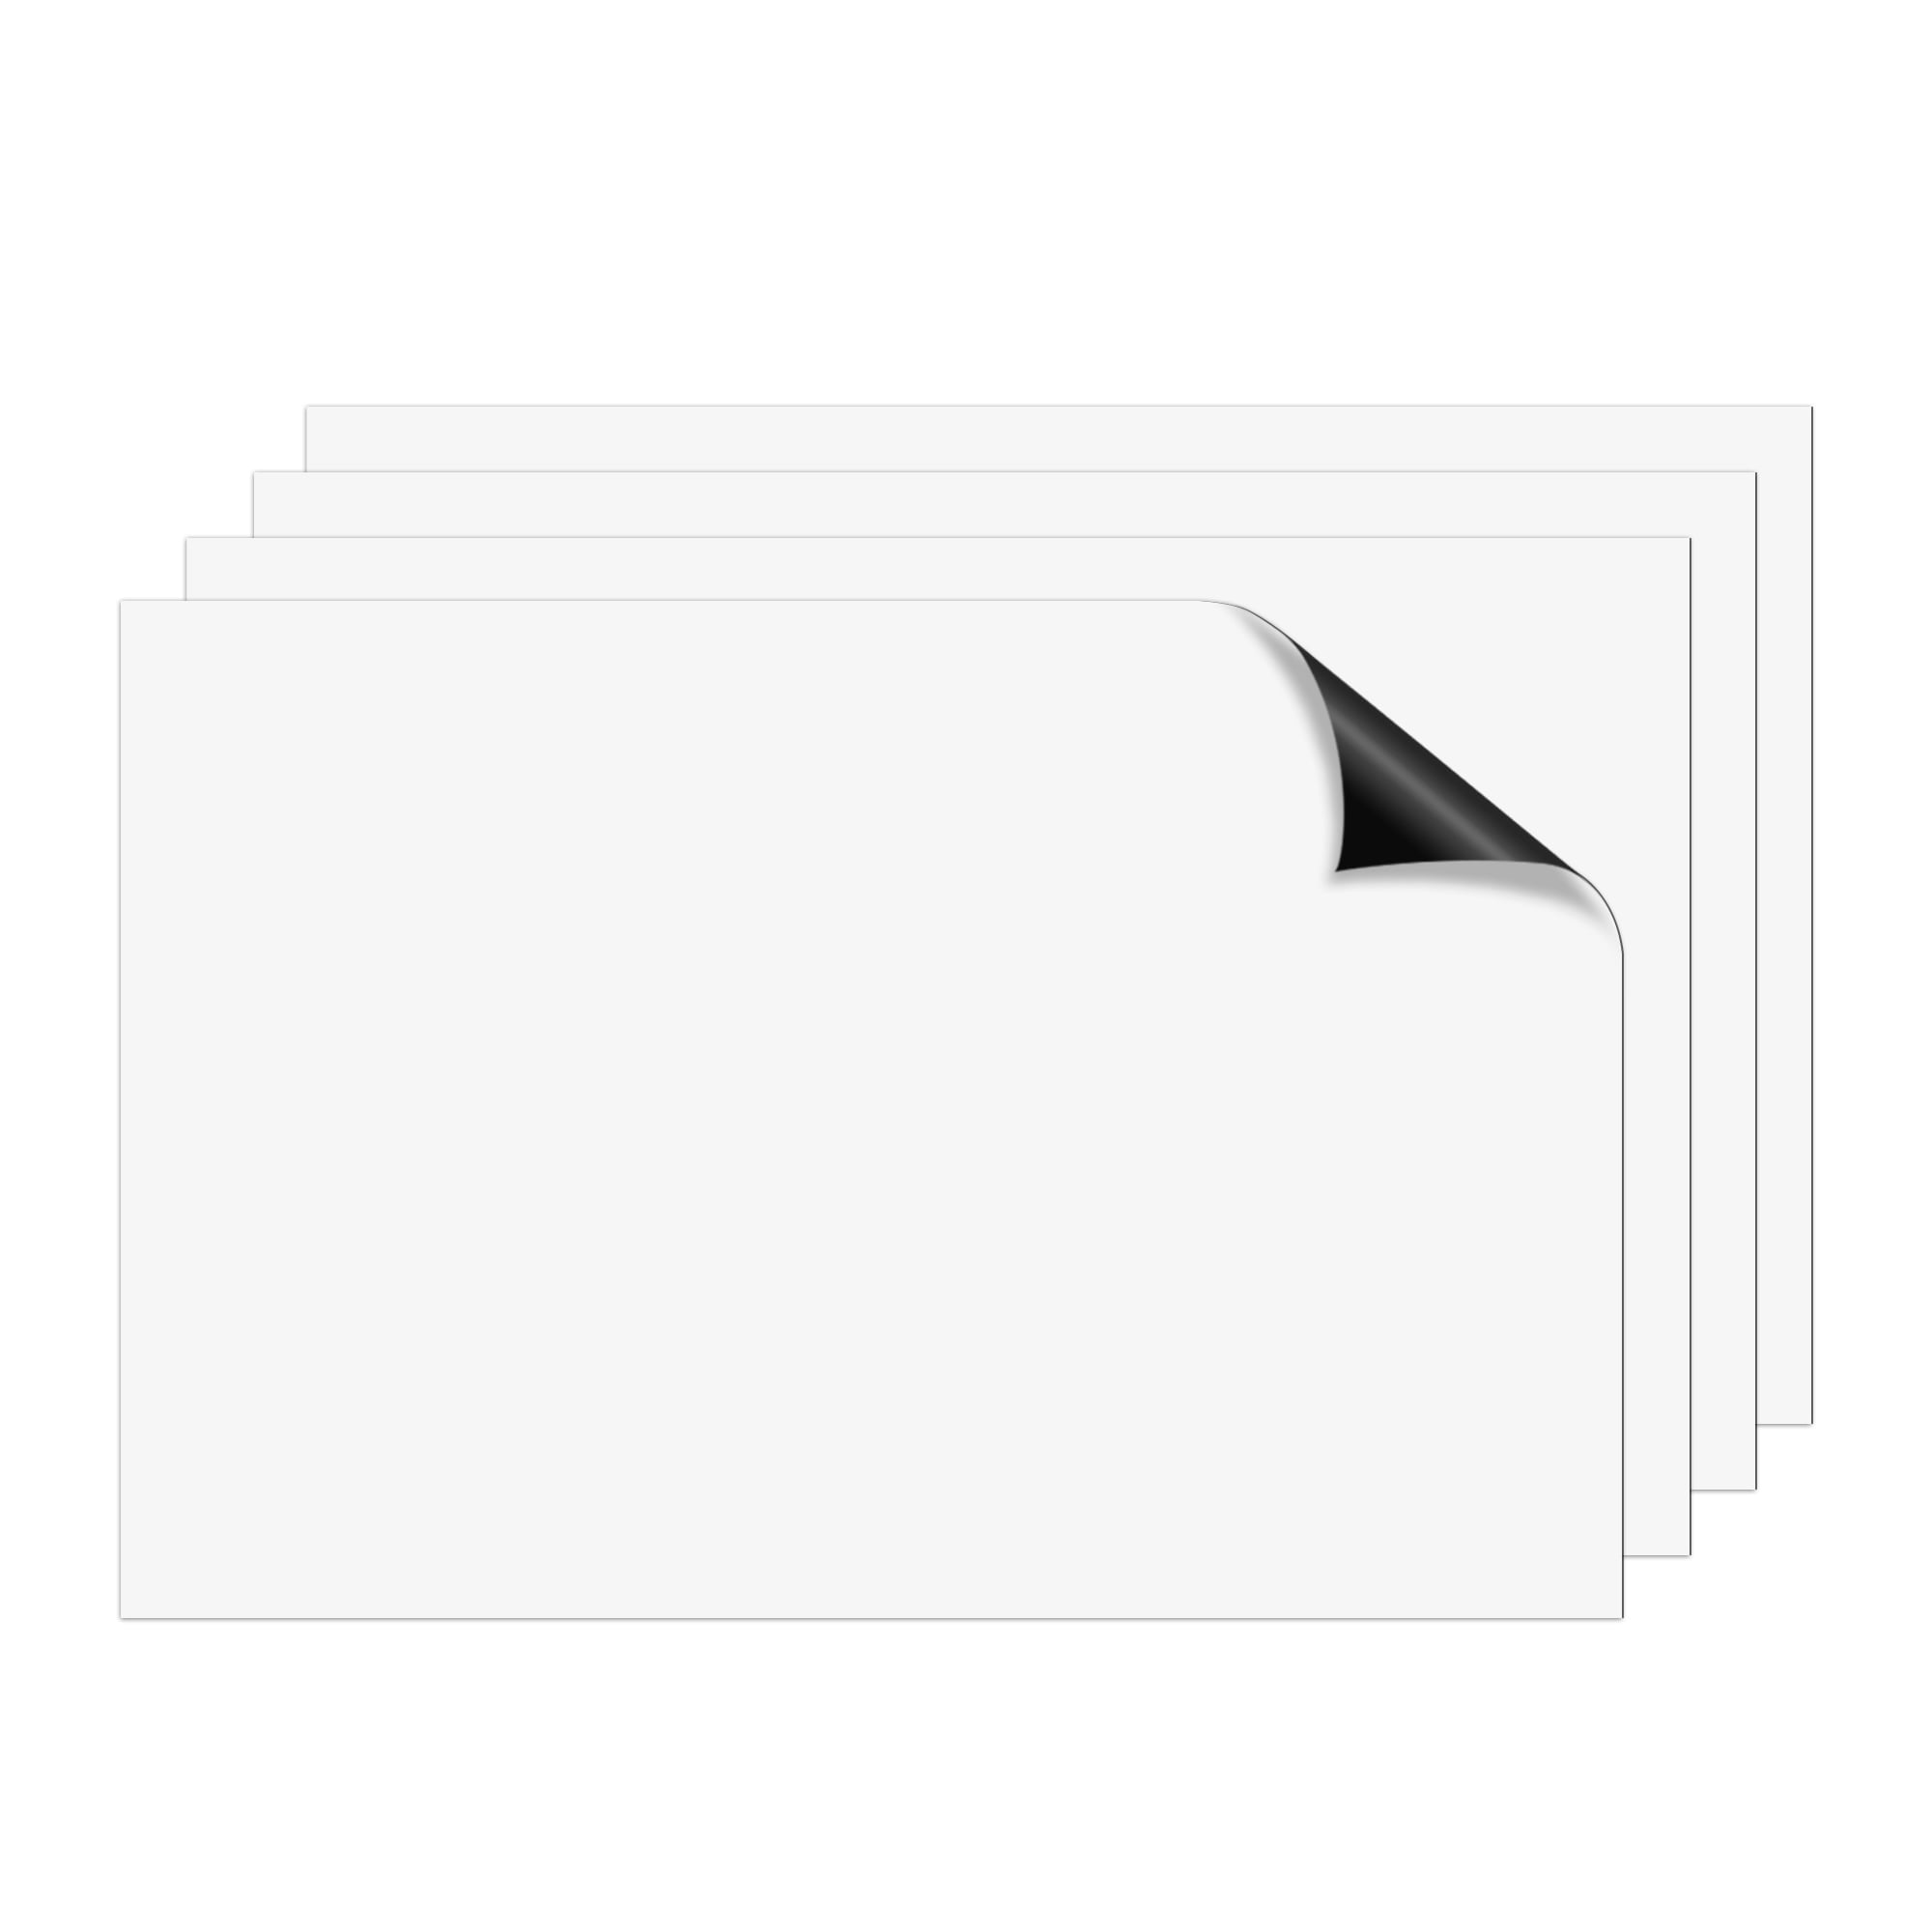  Extra Strong 30 mil- 100 Pack 4 x 6 Plain Magnet Sheets - Marietta  Magnetics Brand : Office Products